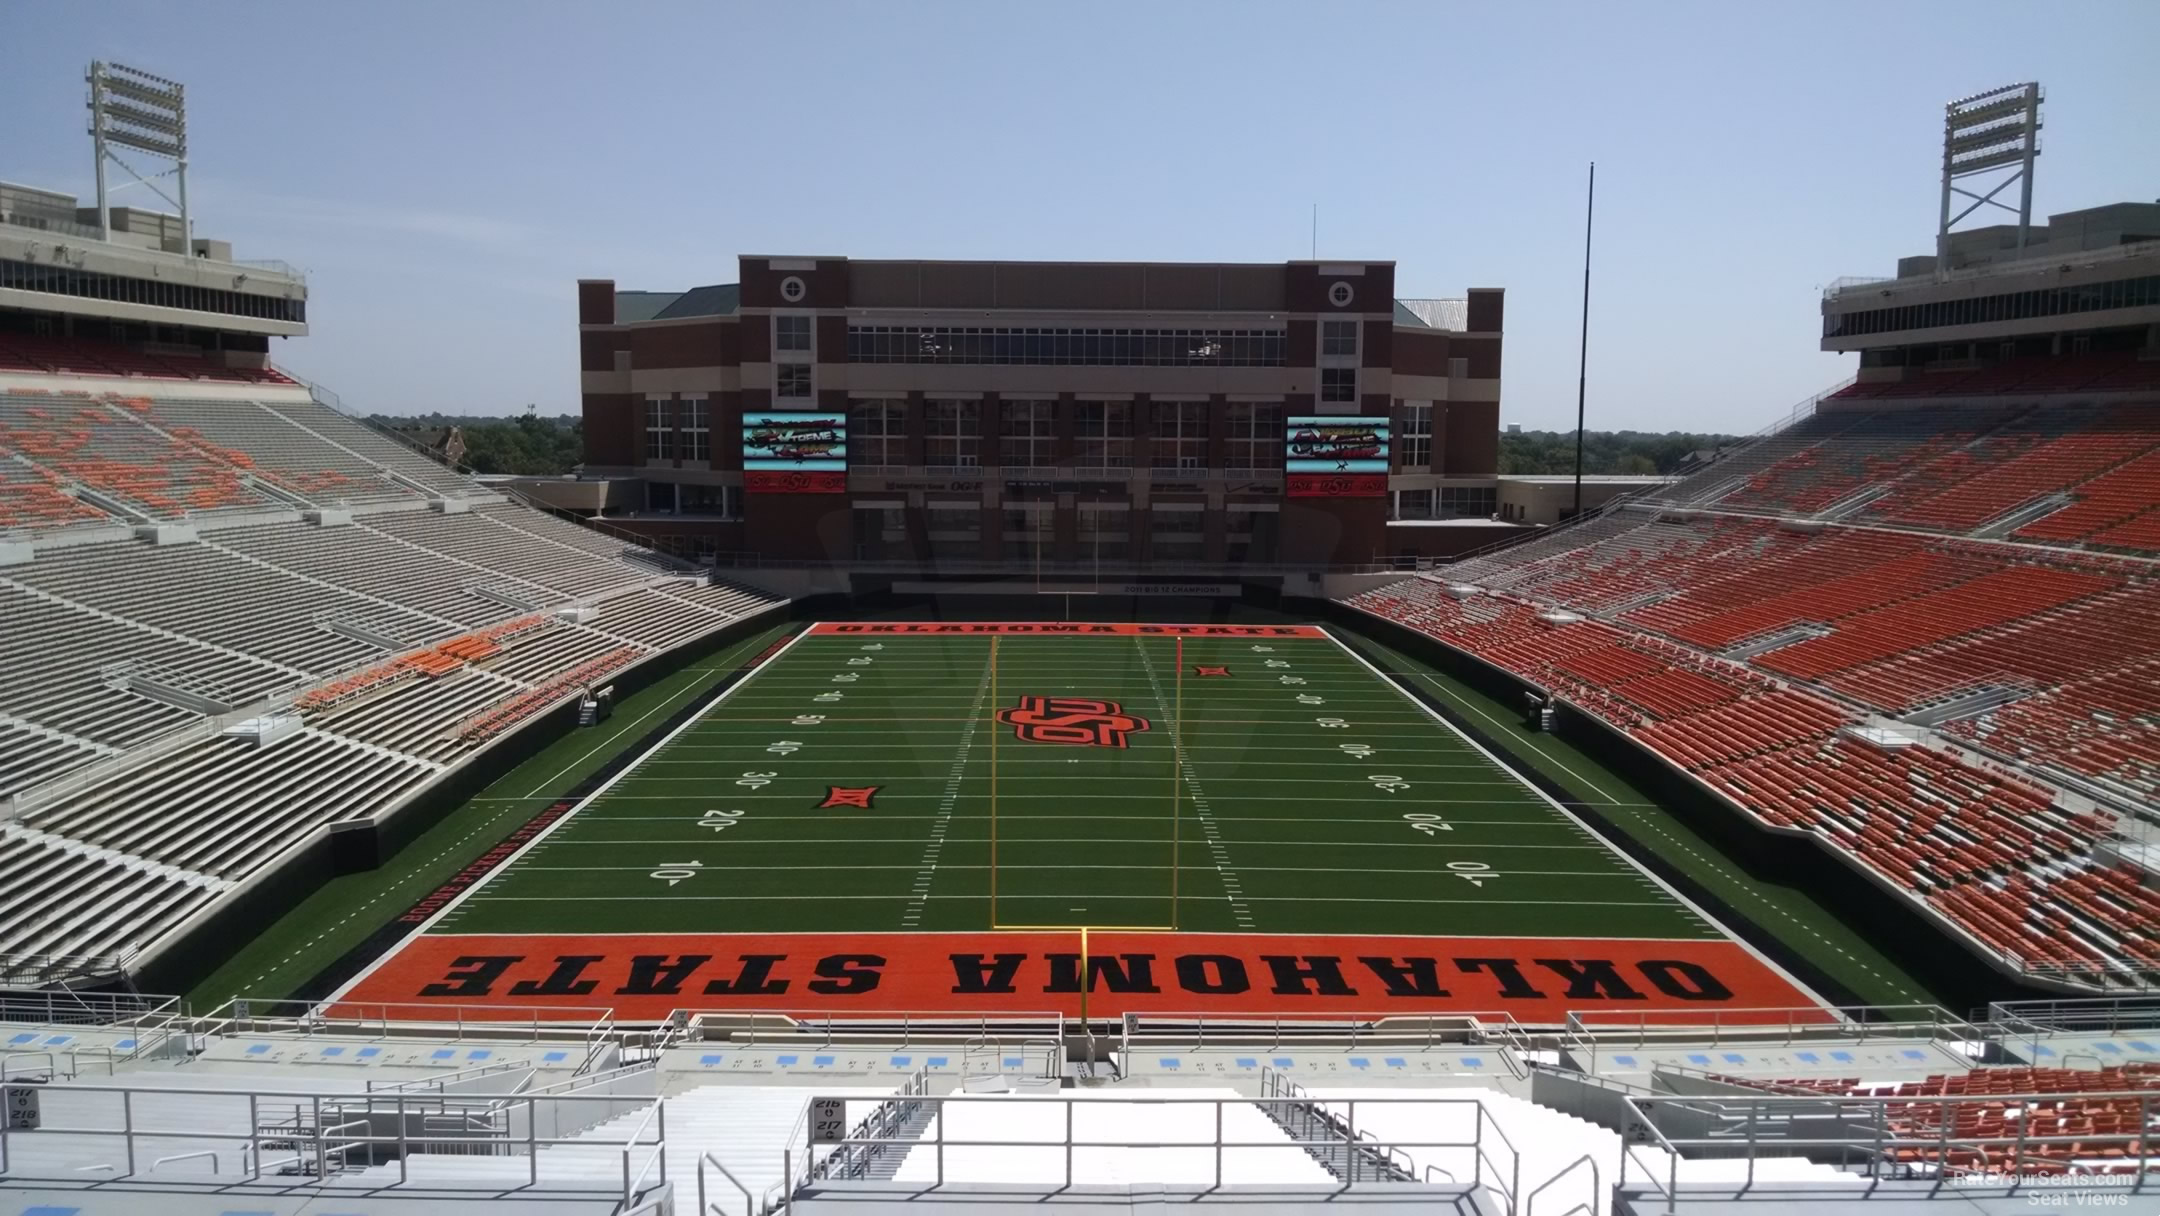 section 319, row 19 seat view  - boone pickens stadium